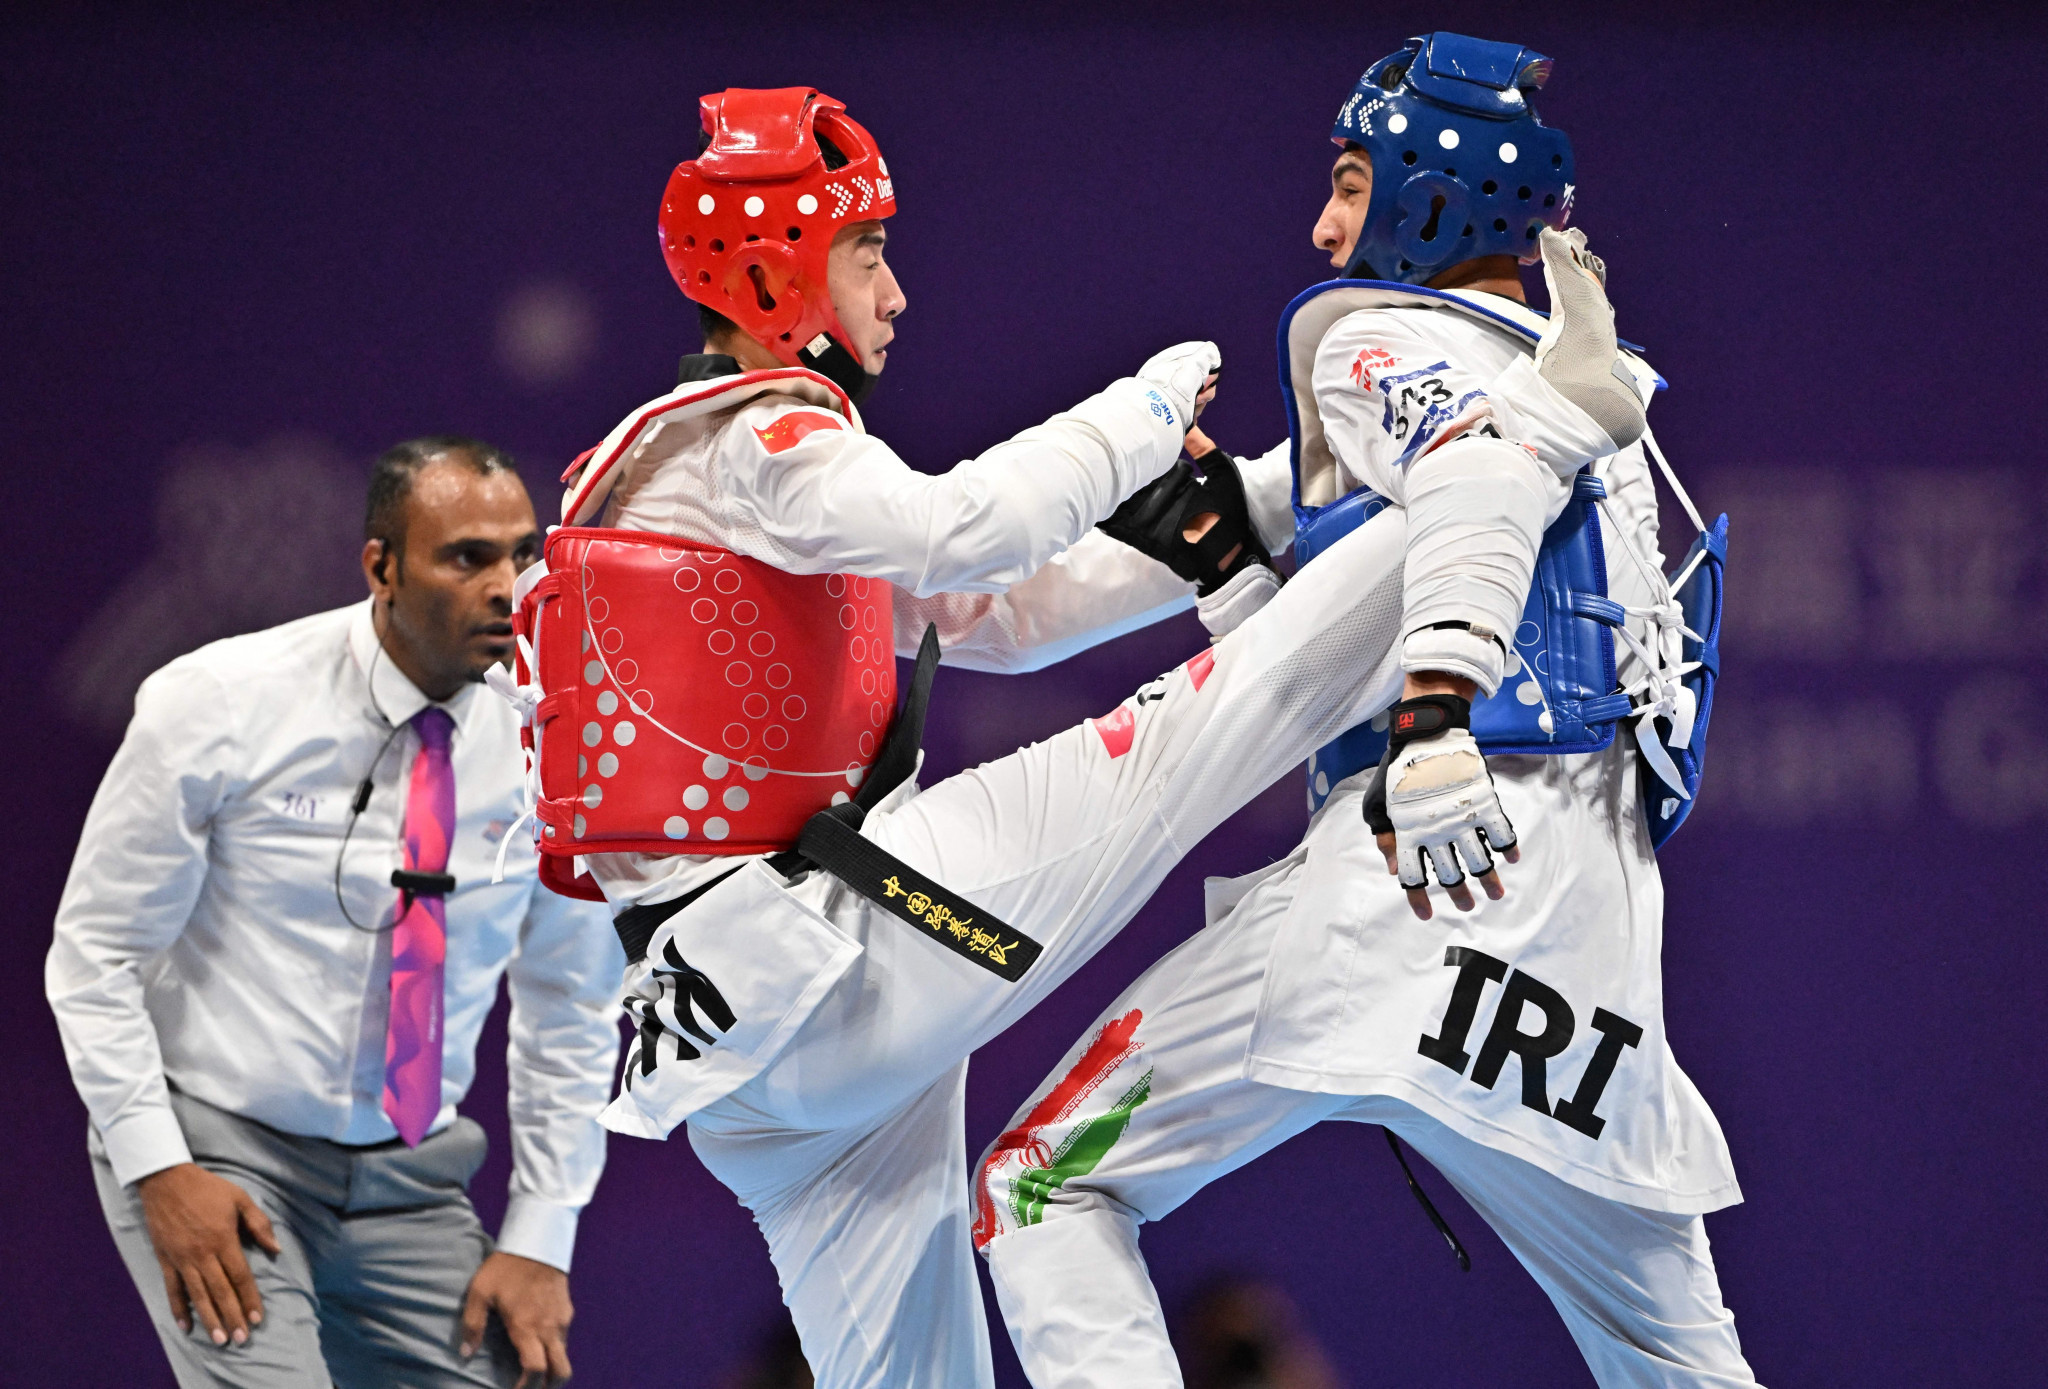 Stars to watch at the Taekwondo Asian Qualifiers